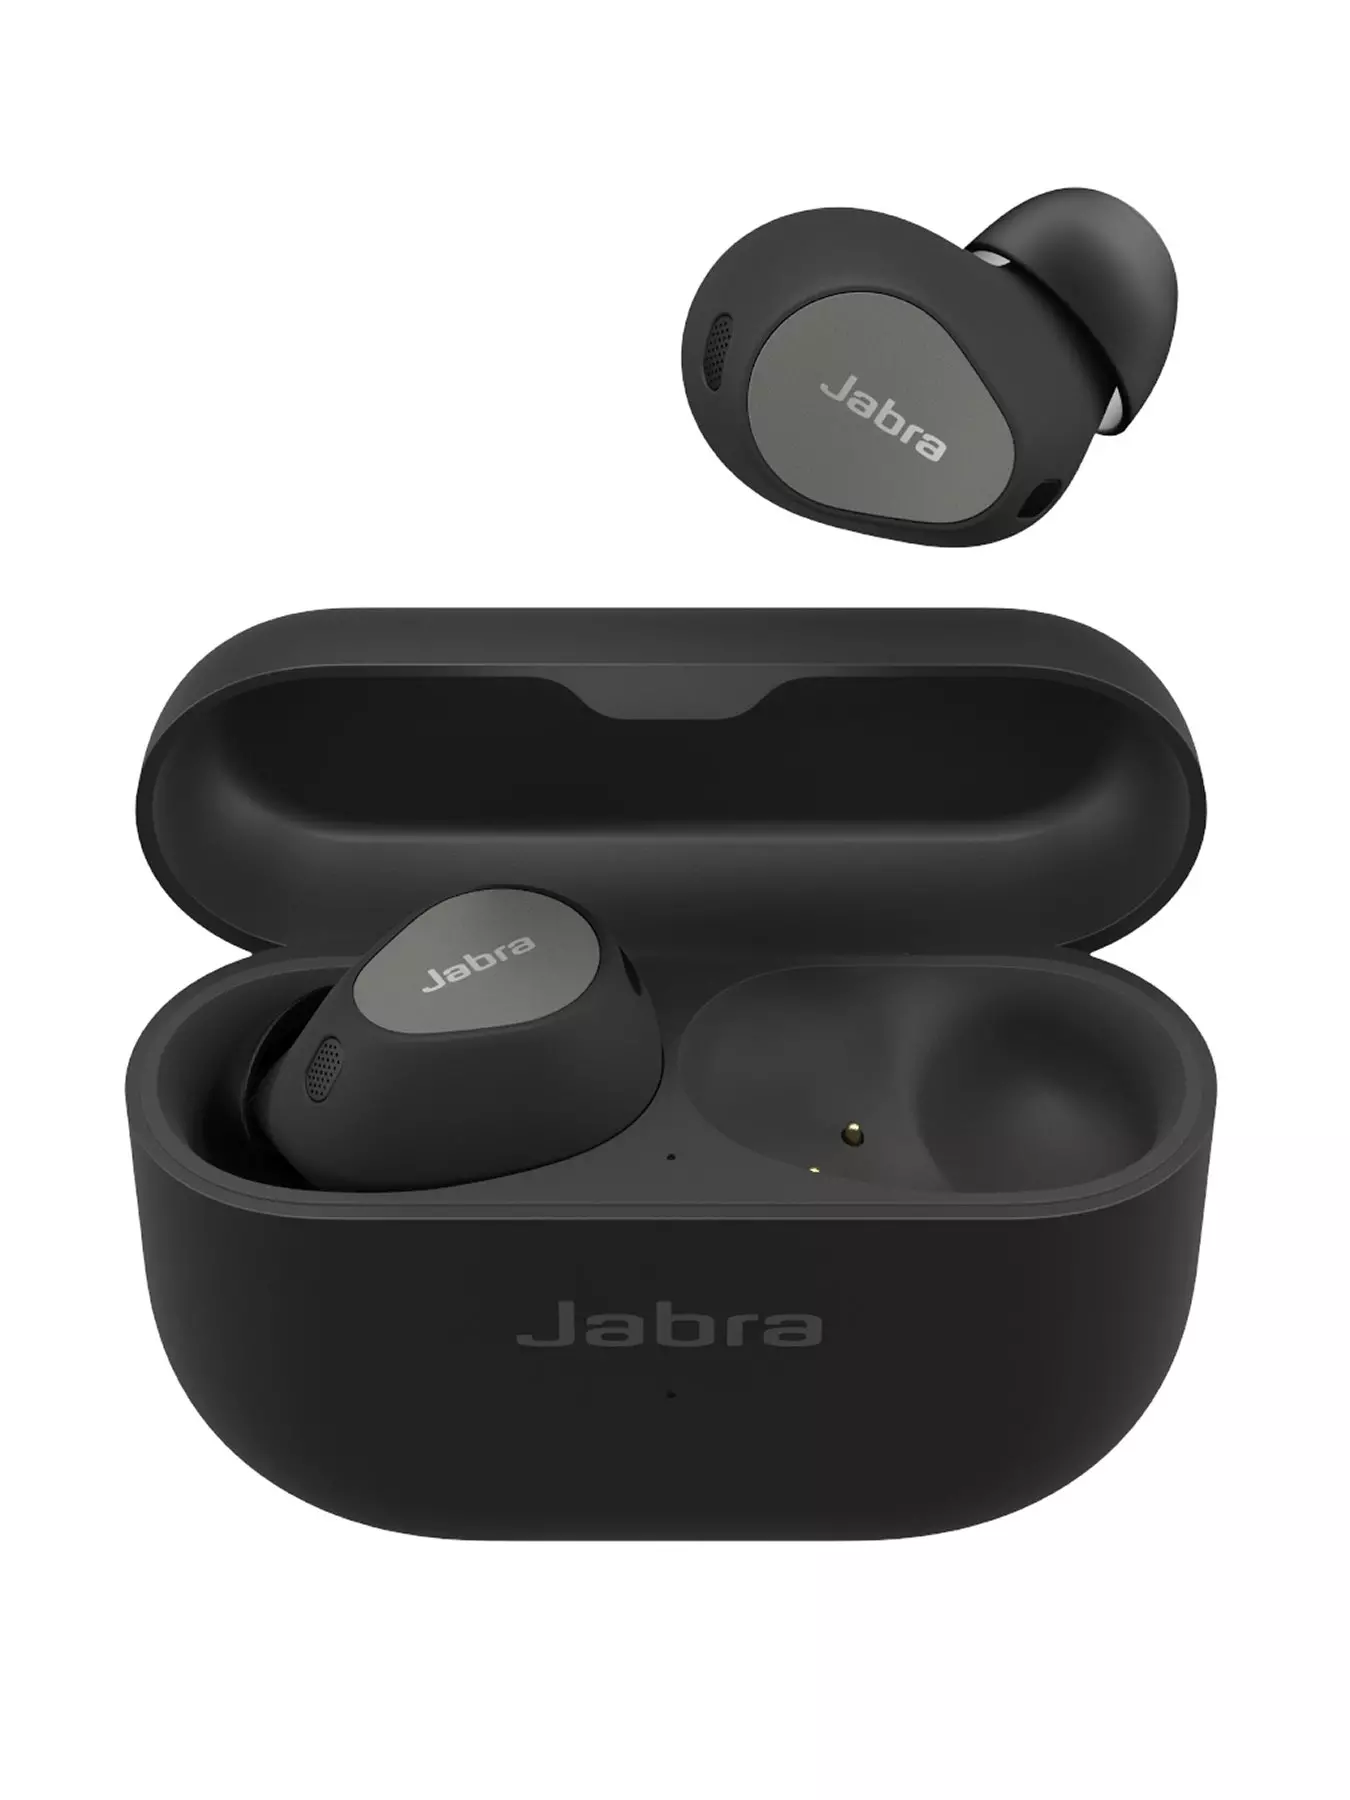  Jabra Elite 5 True Wireless in-Ear Bluetooth Earbuds - Hybrid  Active Noise Cancellation (ANC), 6 Built-in Microphones for Clear Calls,  Small Ergonomic Fit and 6mm Speakers - Gold Beige : Everything Else